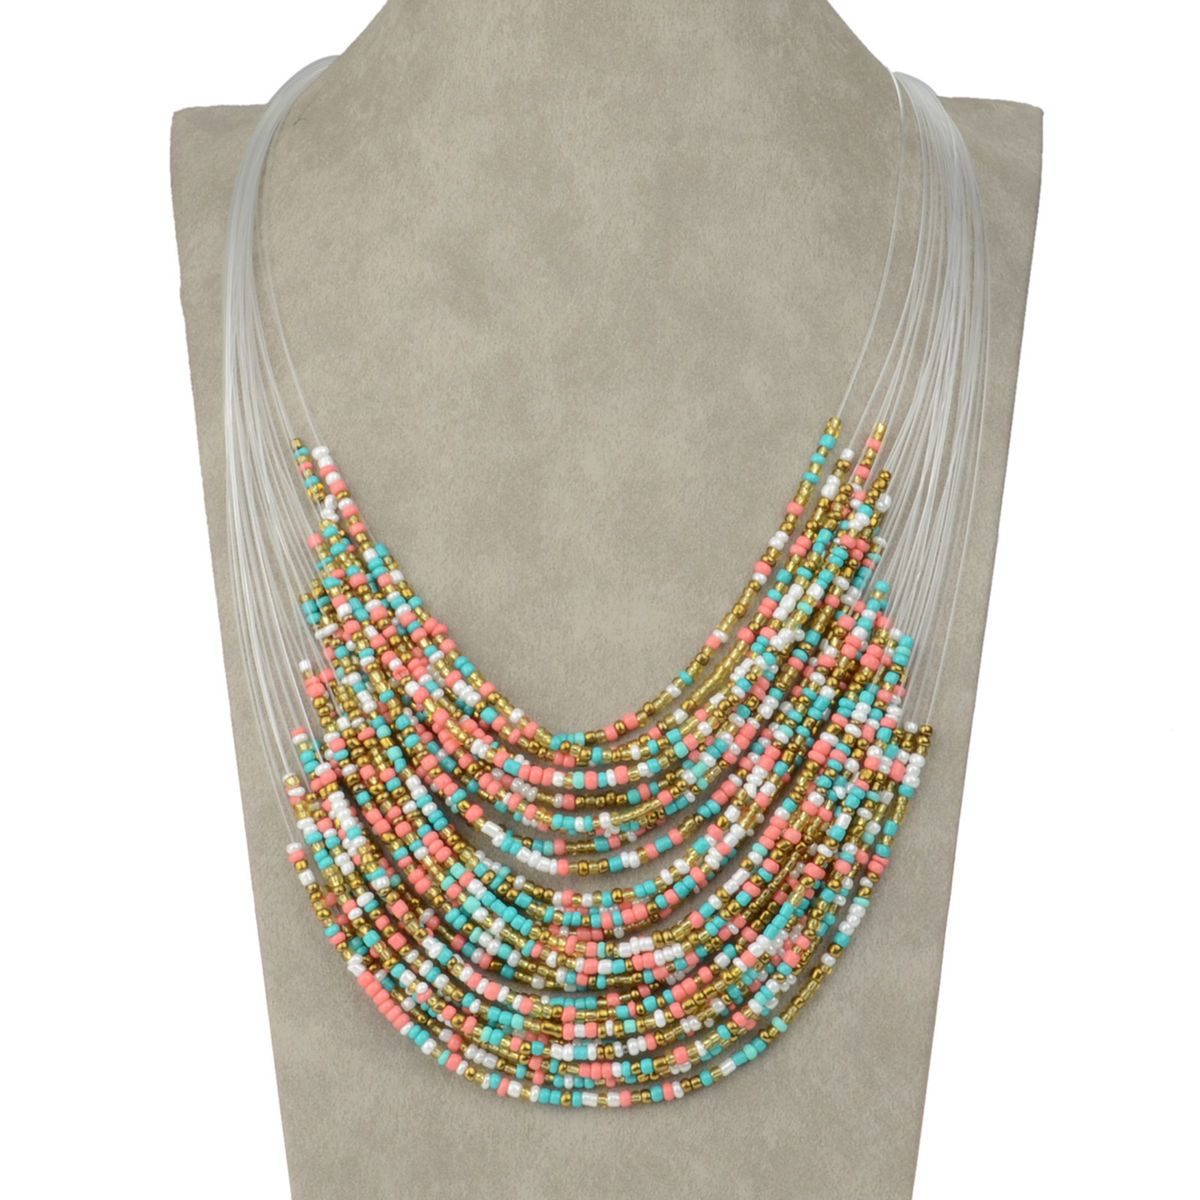 Graceful Multilayer Glass Beads Pendant Necklace Jewelry Earrings Set